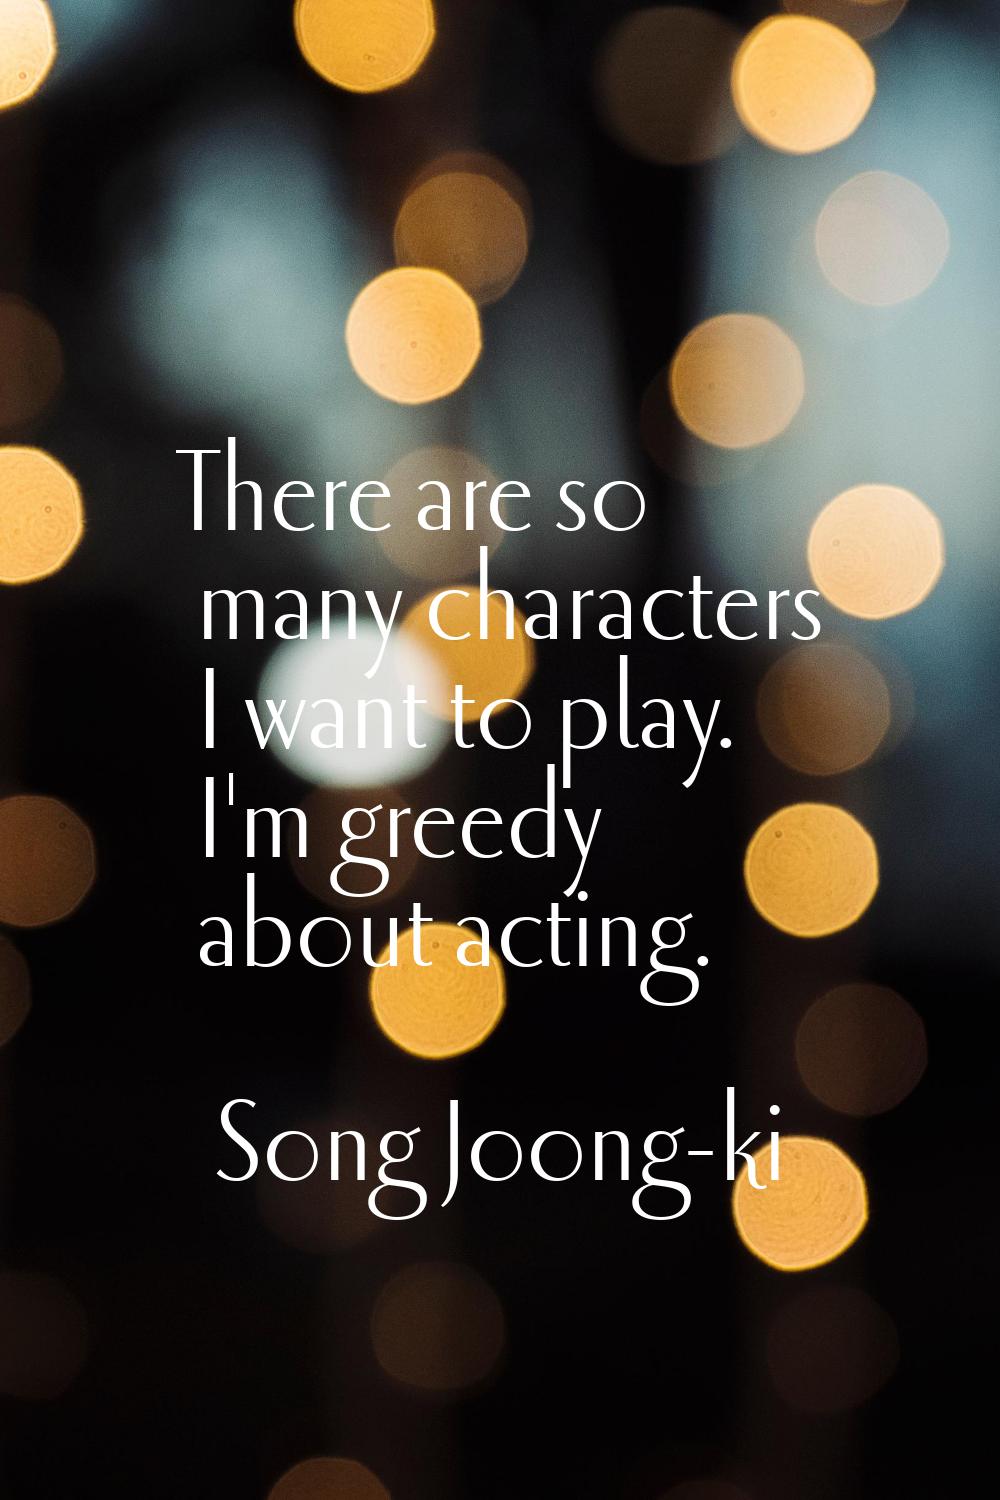 There are so many characters I want to play. I'm greedy about acting.